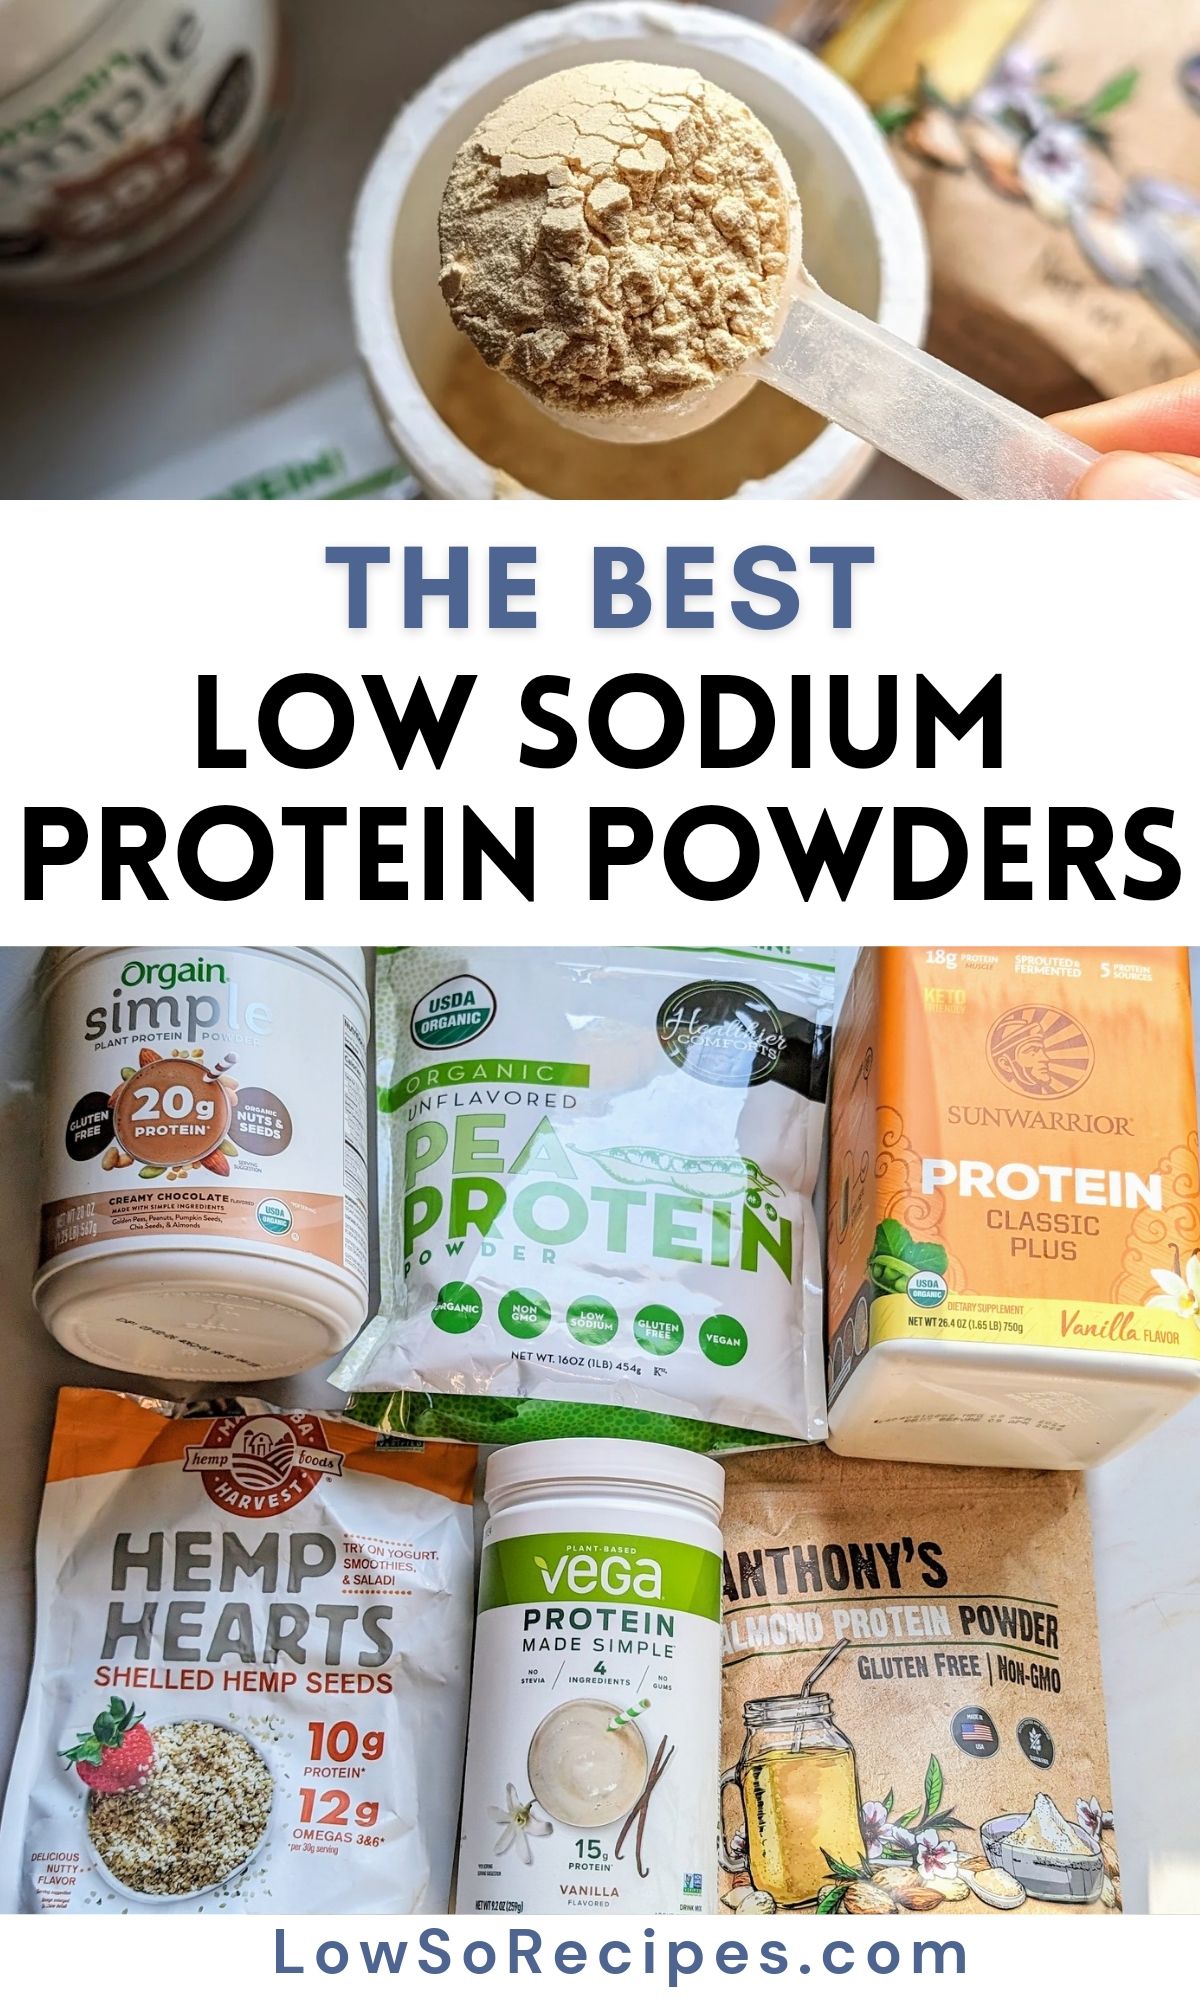 the best low sodium protein powders vegan whey proteins and plant based varieties